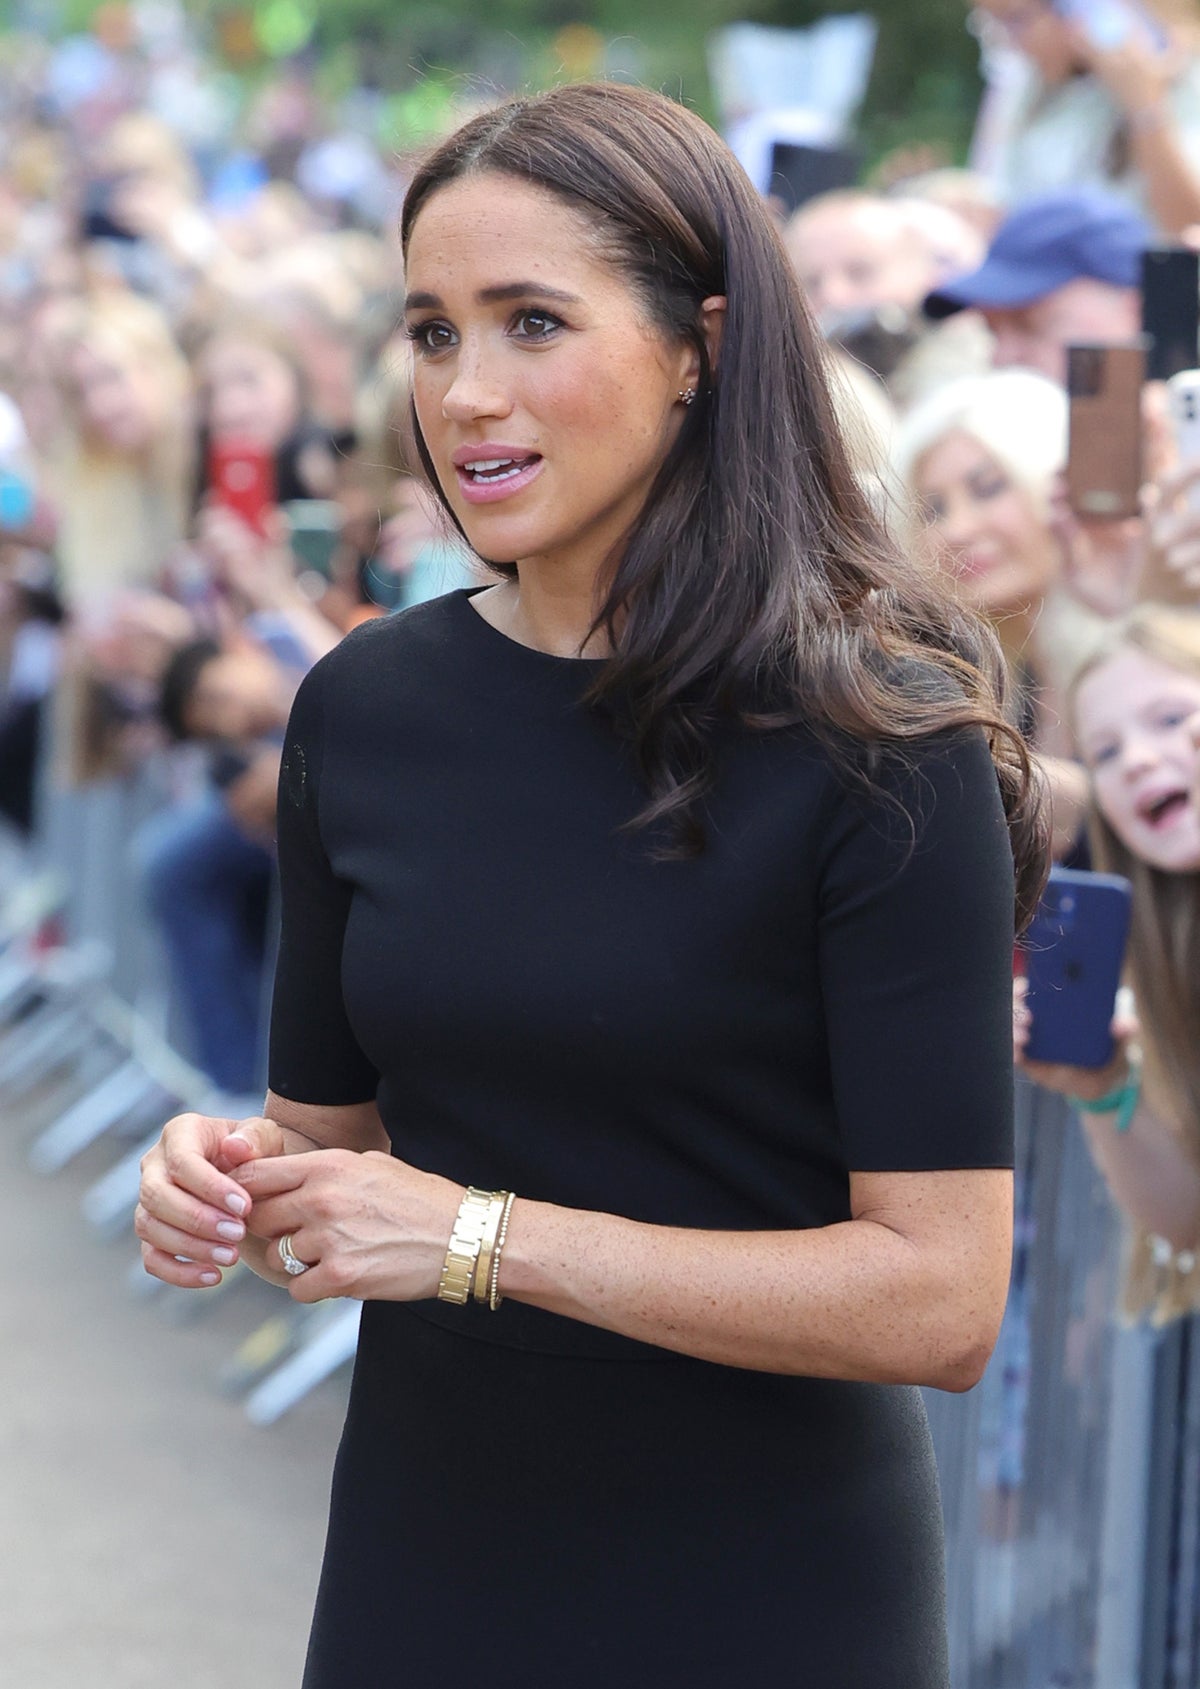 Duchess of Sussex’s US women’s honour postponed out of respect for the Queen